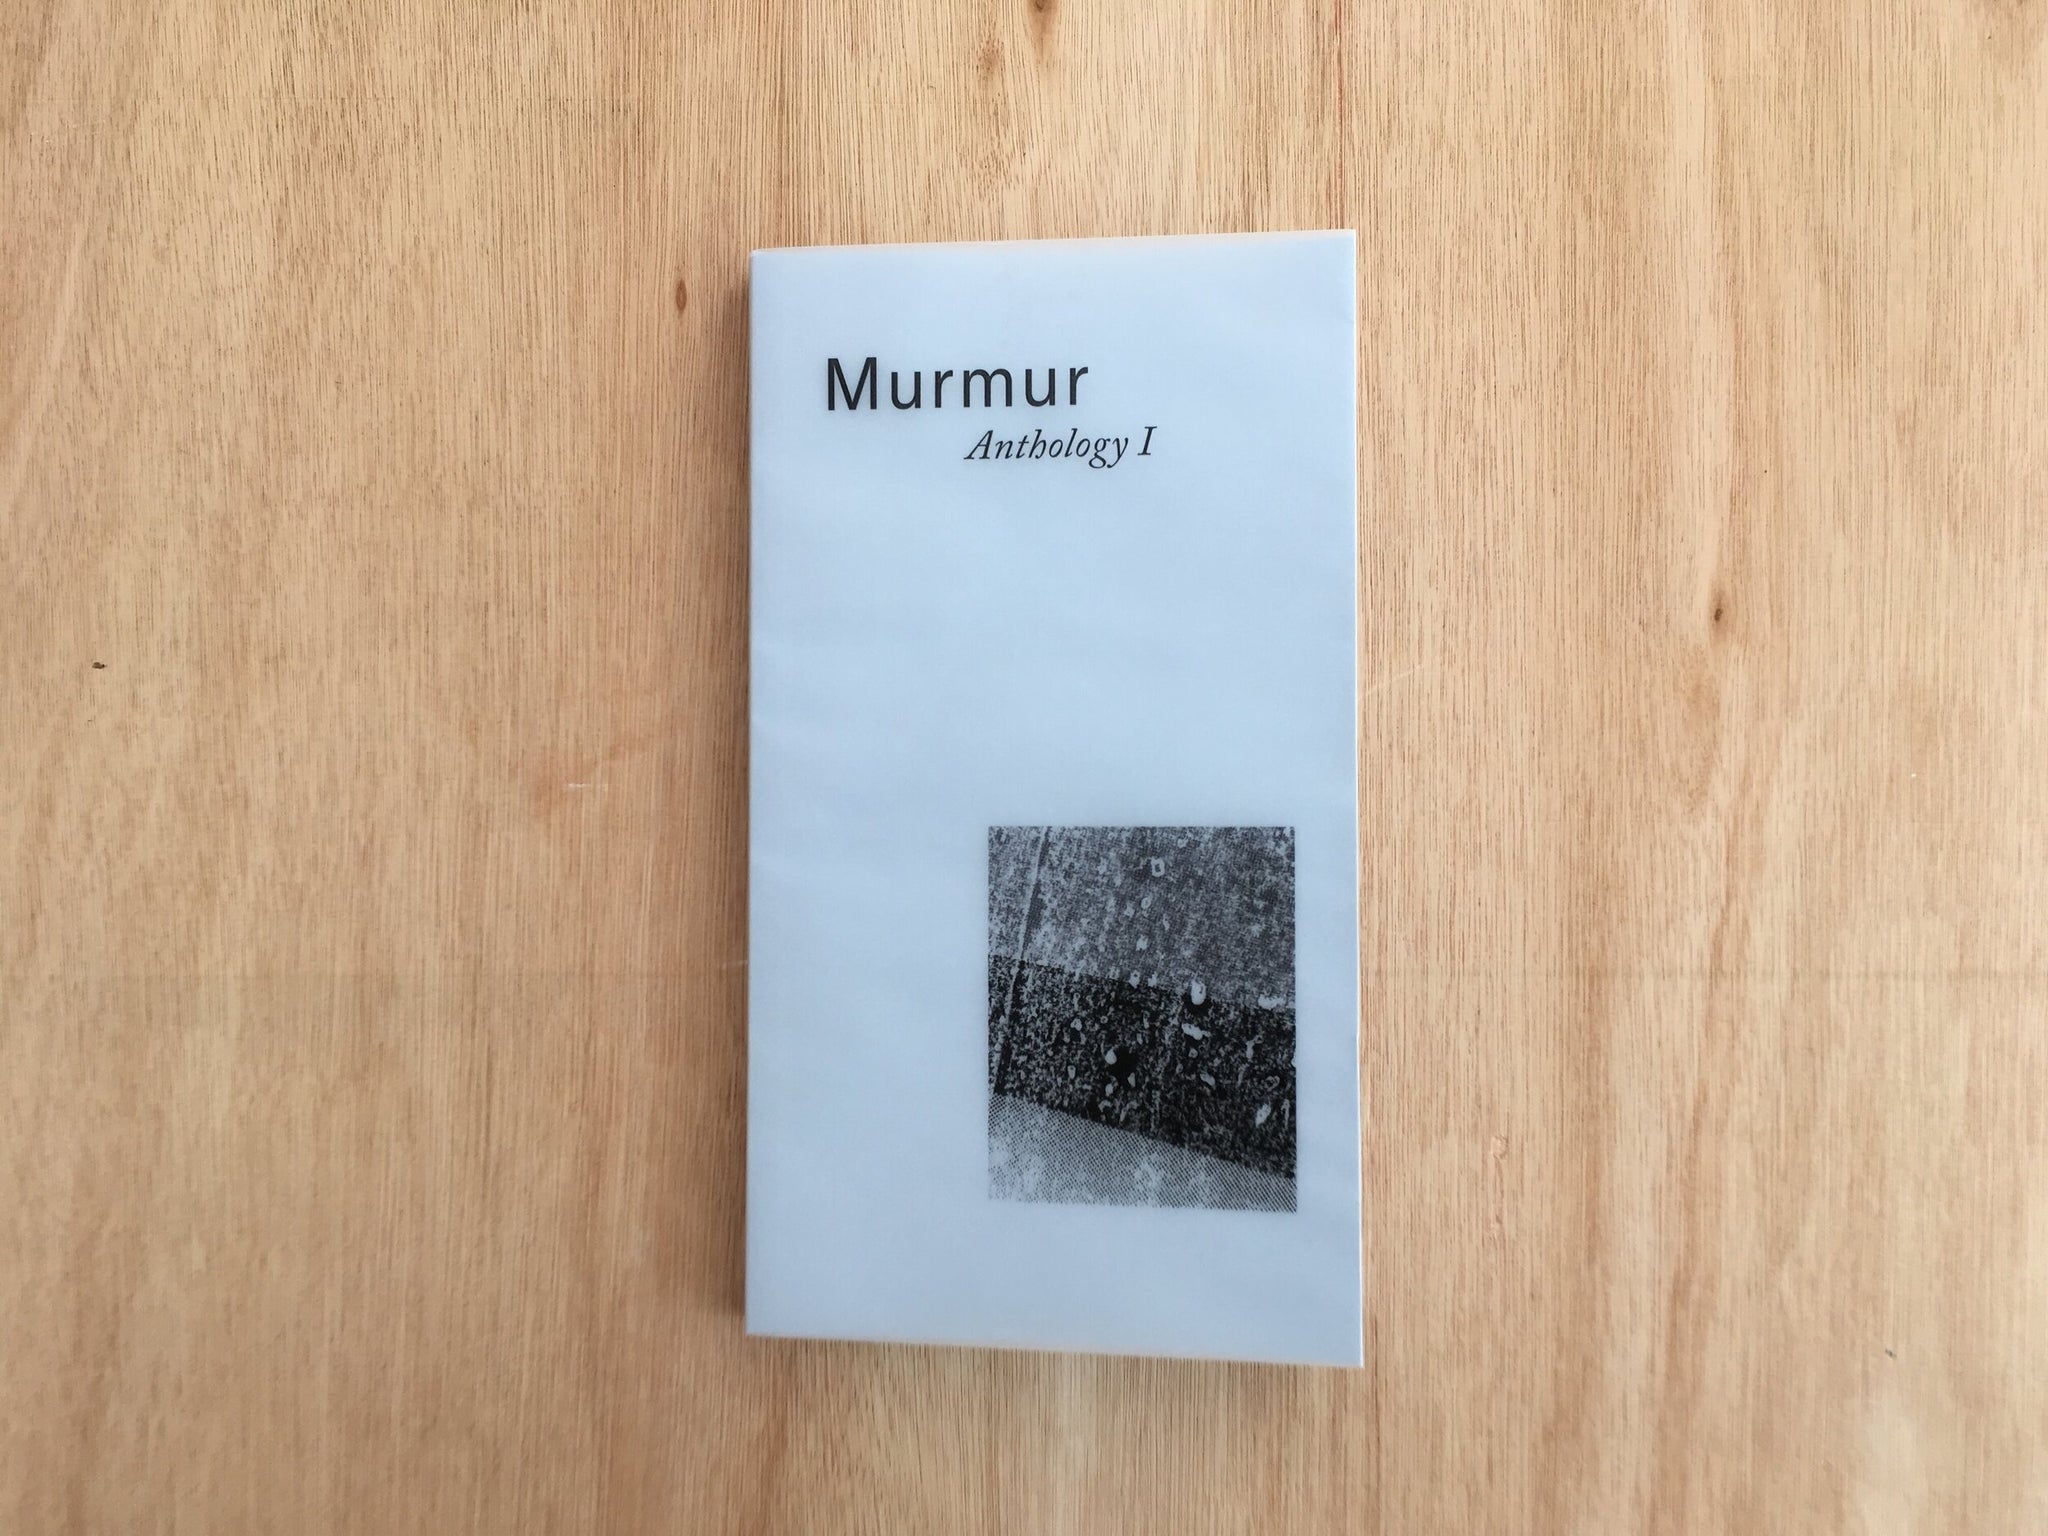 MURMUR: ANTHOLOGY 1 by Various Artists